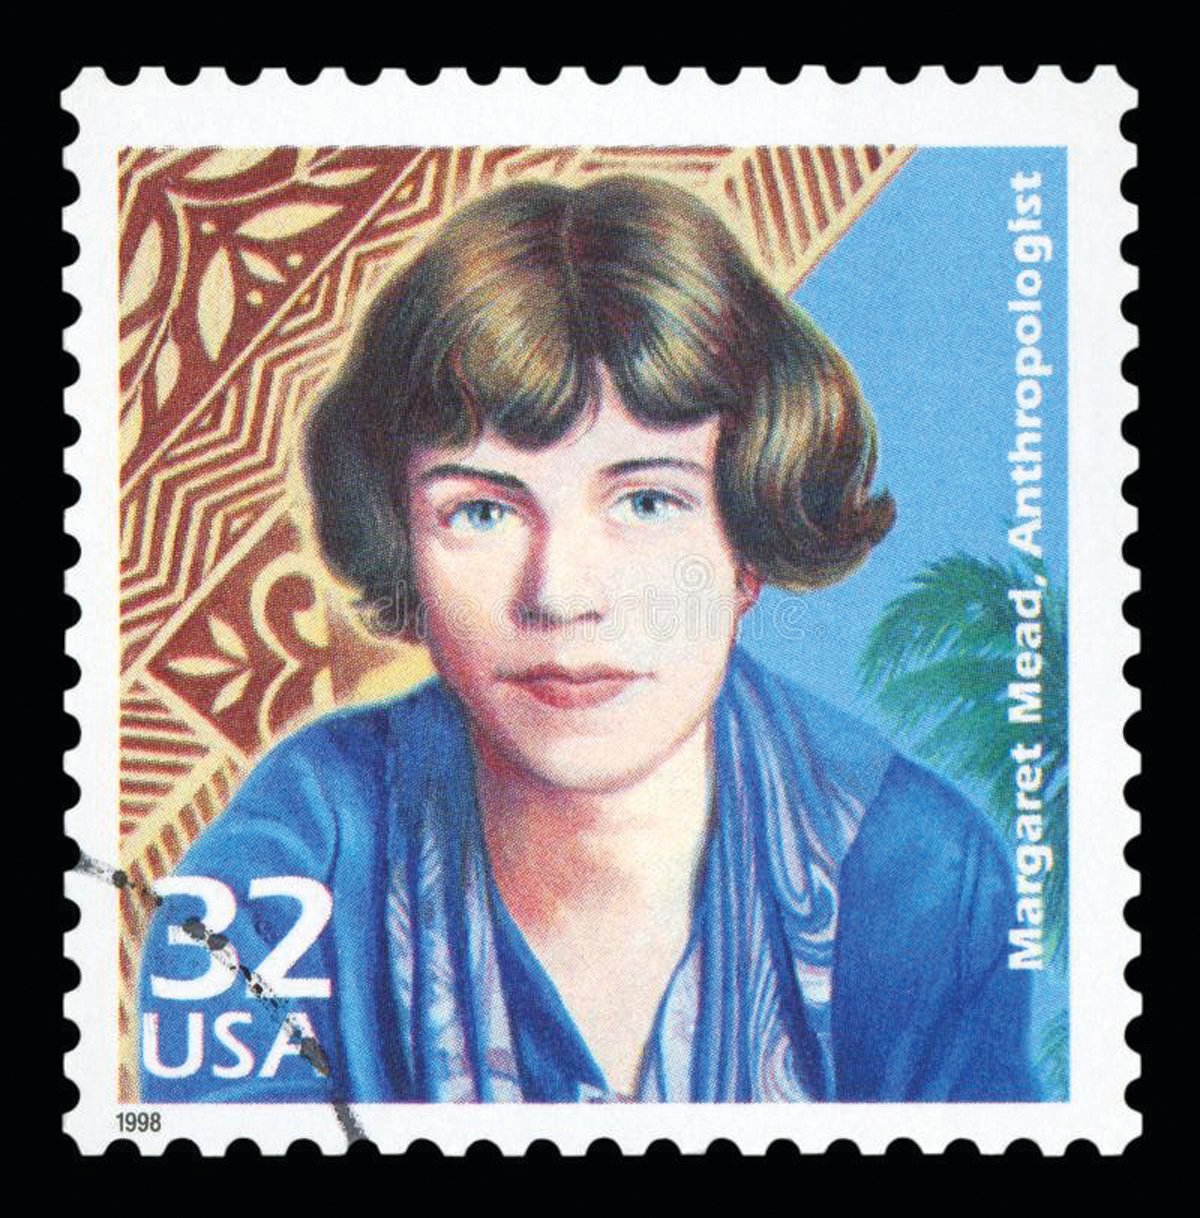 The Margaret Mead commemorative stamp was issued May 28, 1998, 20 years after her death.